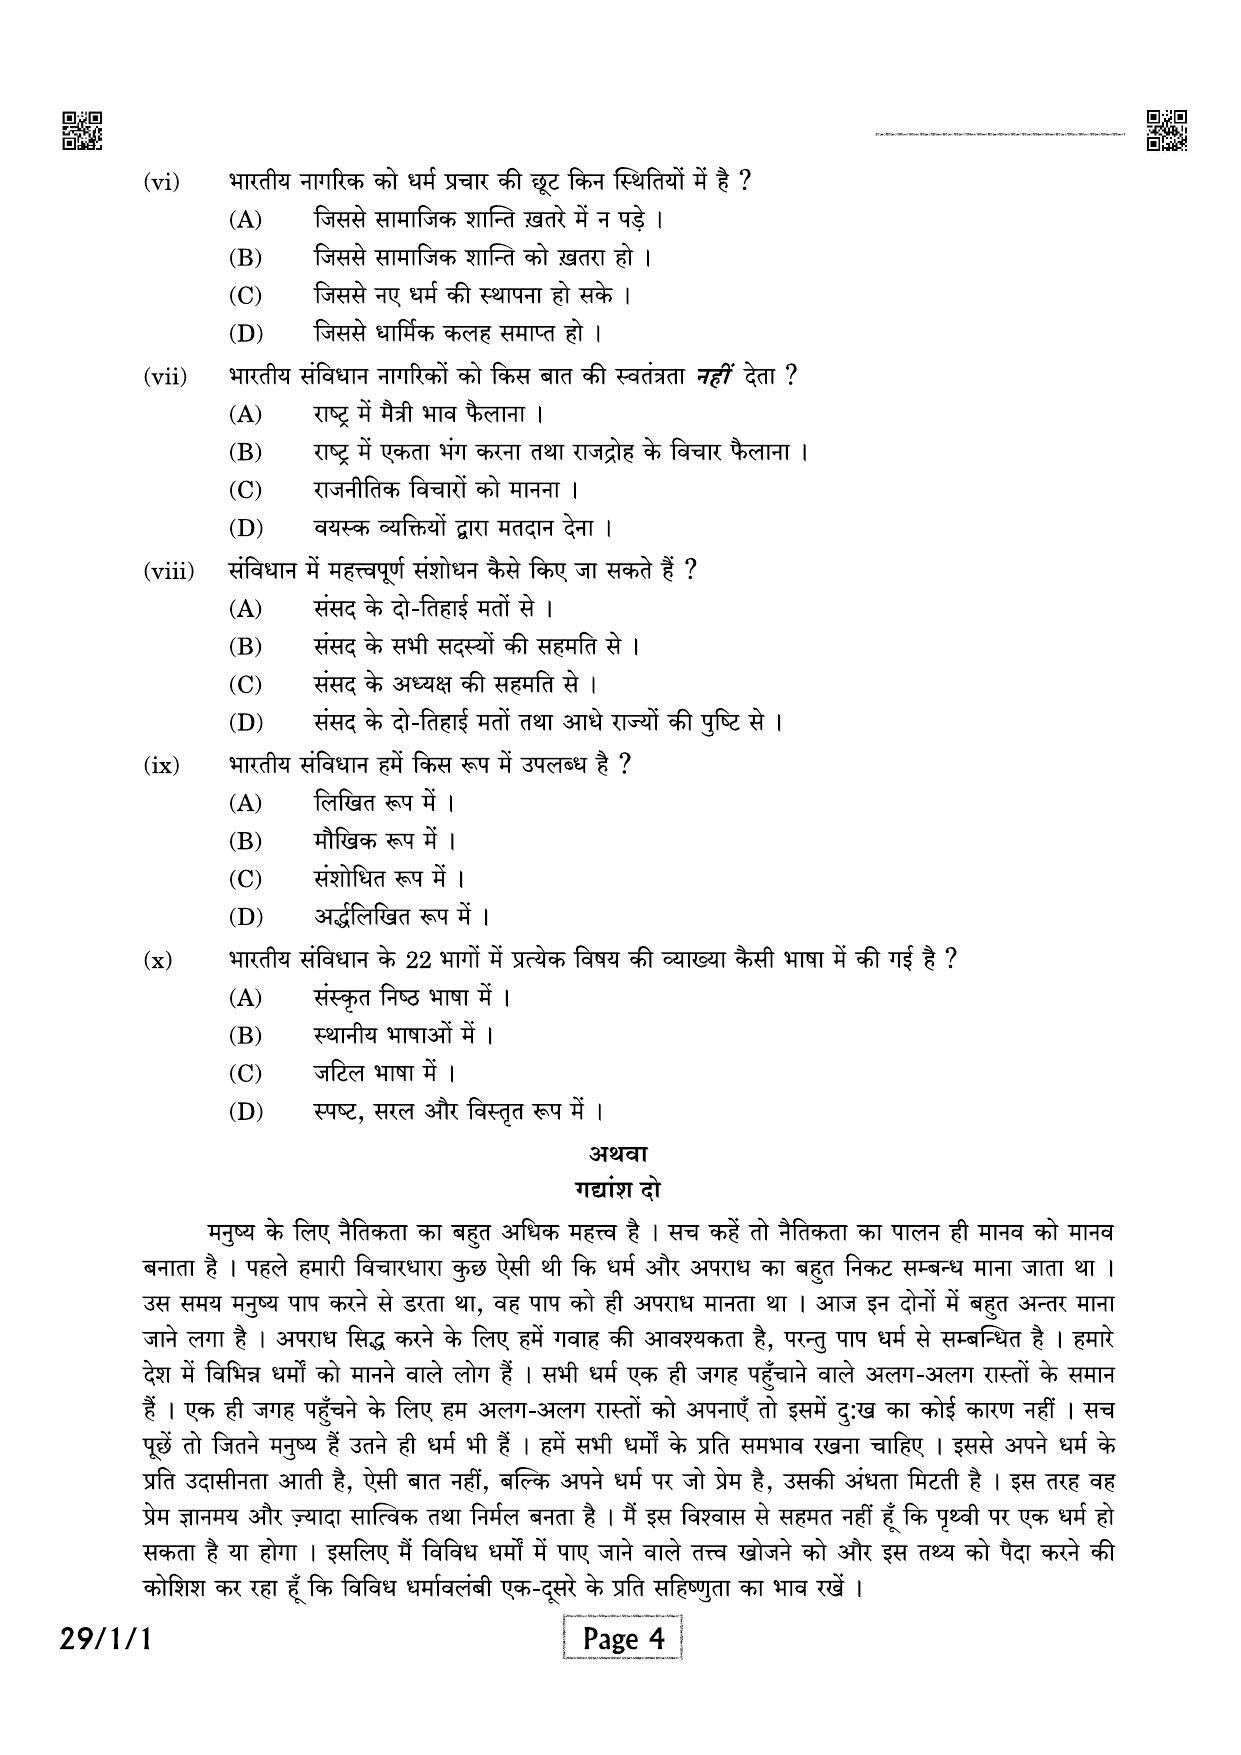 CBSE Class 12 QP_002_HINDI_ELECTIVE 2021 Compartment Question Paper - Page 4